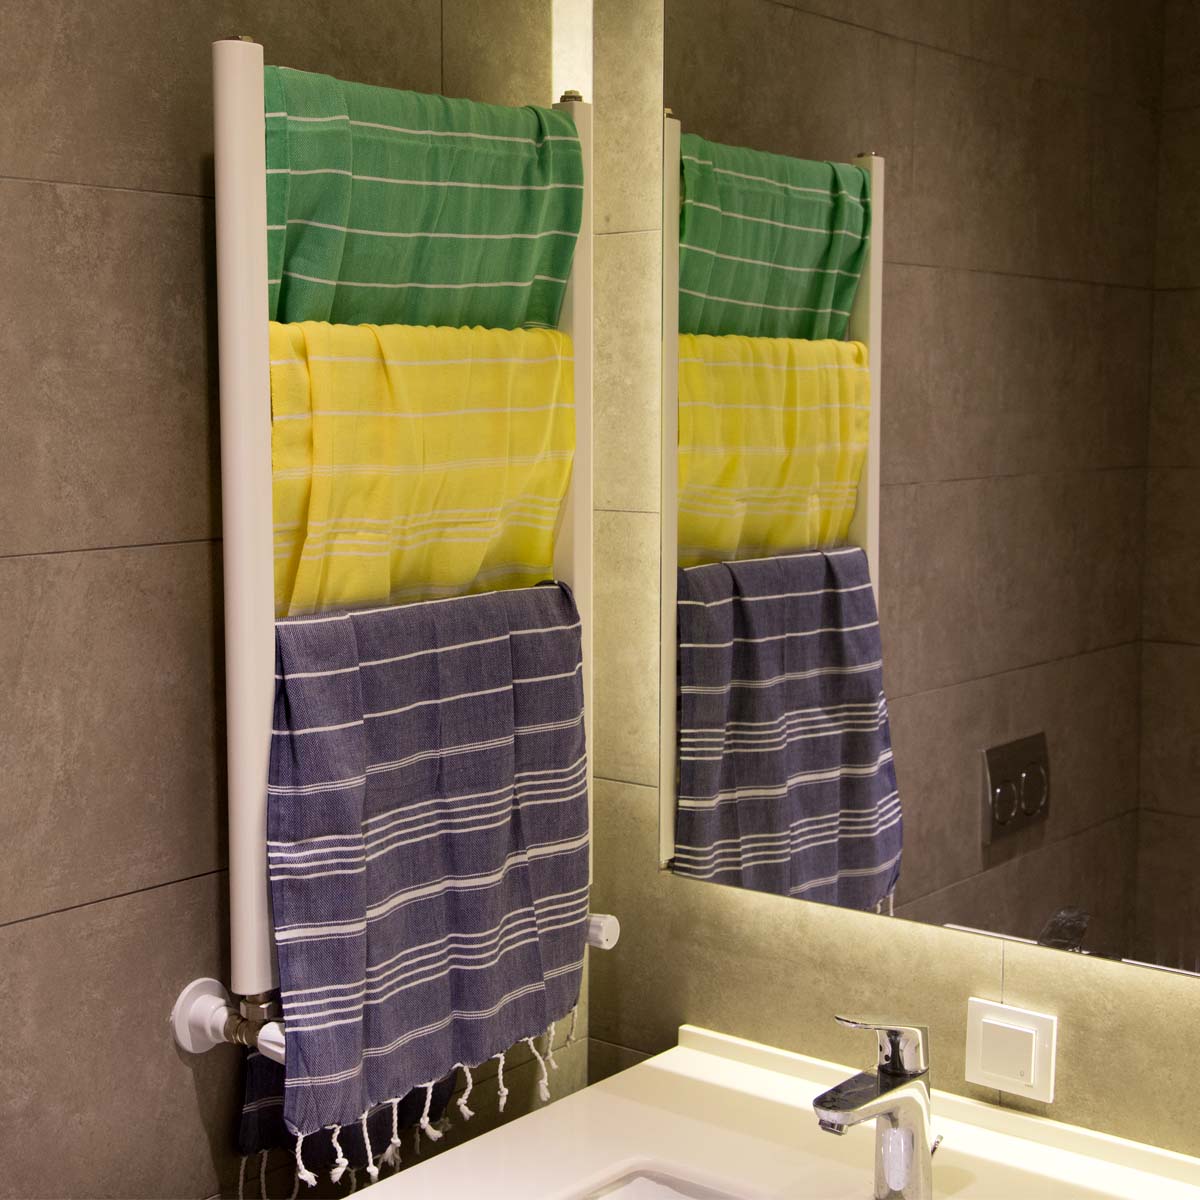 Turkish Home Hand Towel Set of 4, Bright Yellow, 100% Cotton 18 X 40 inches (Classic)